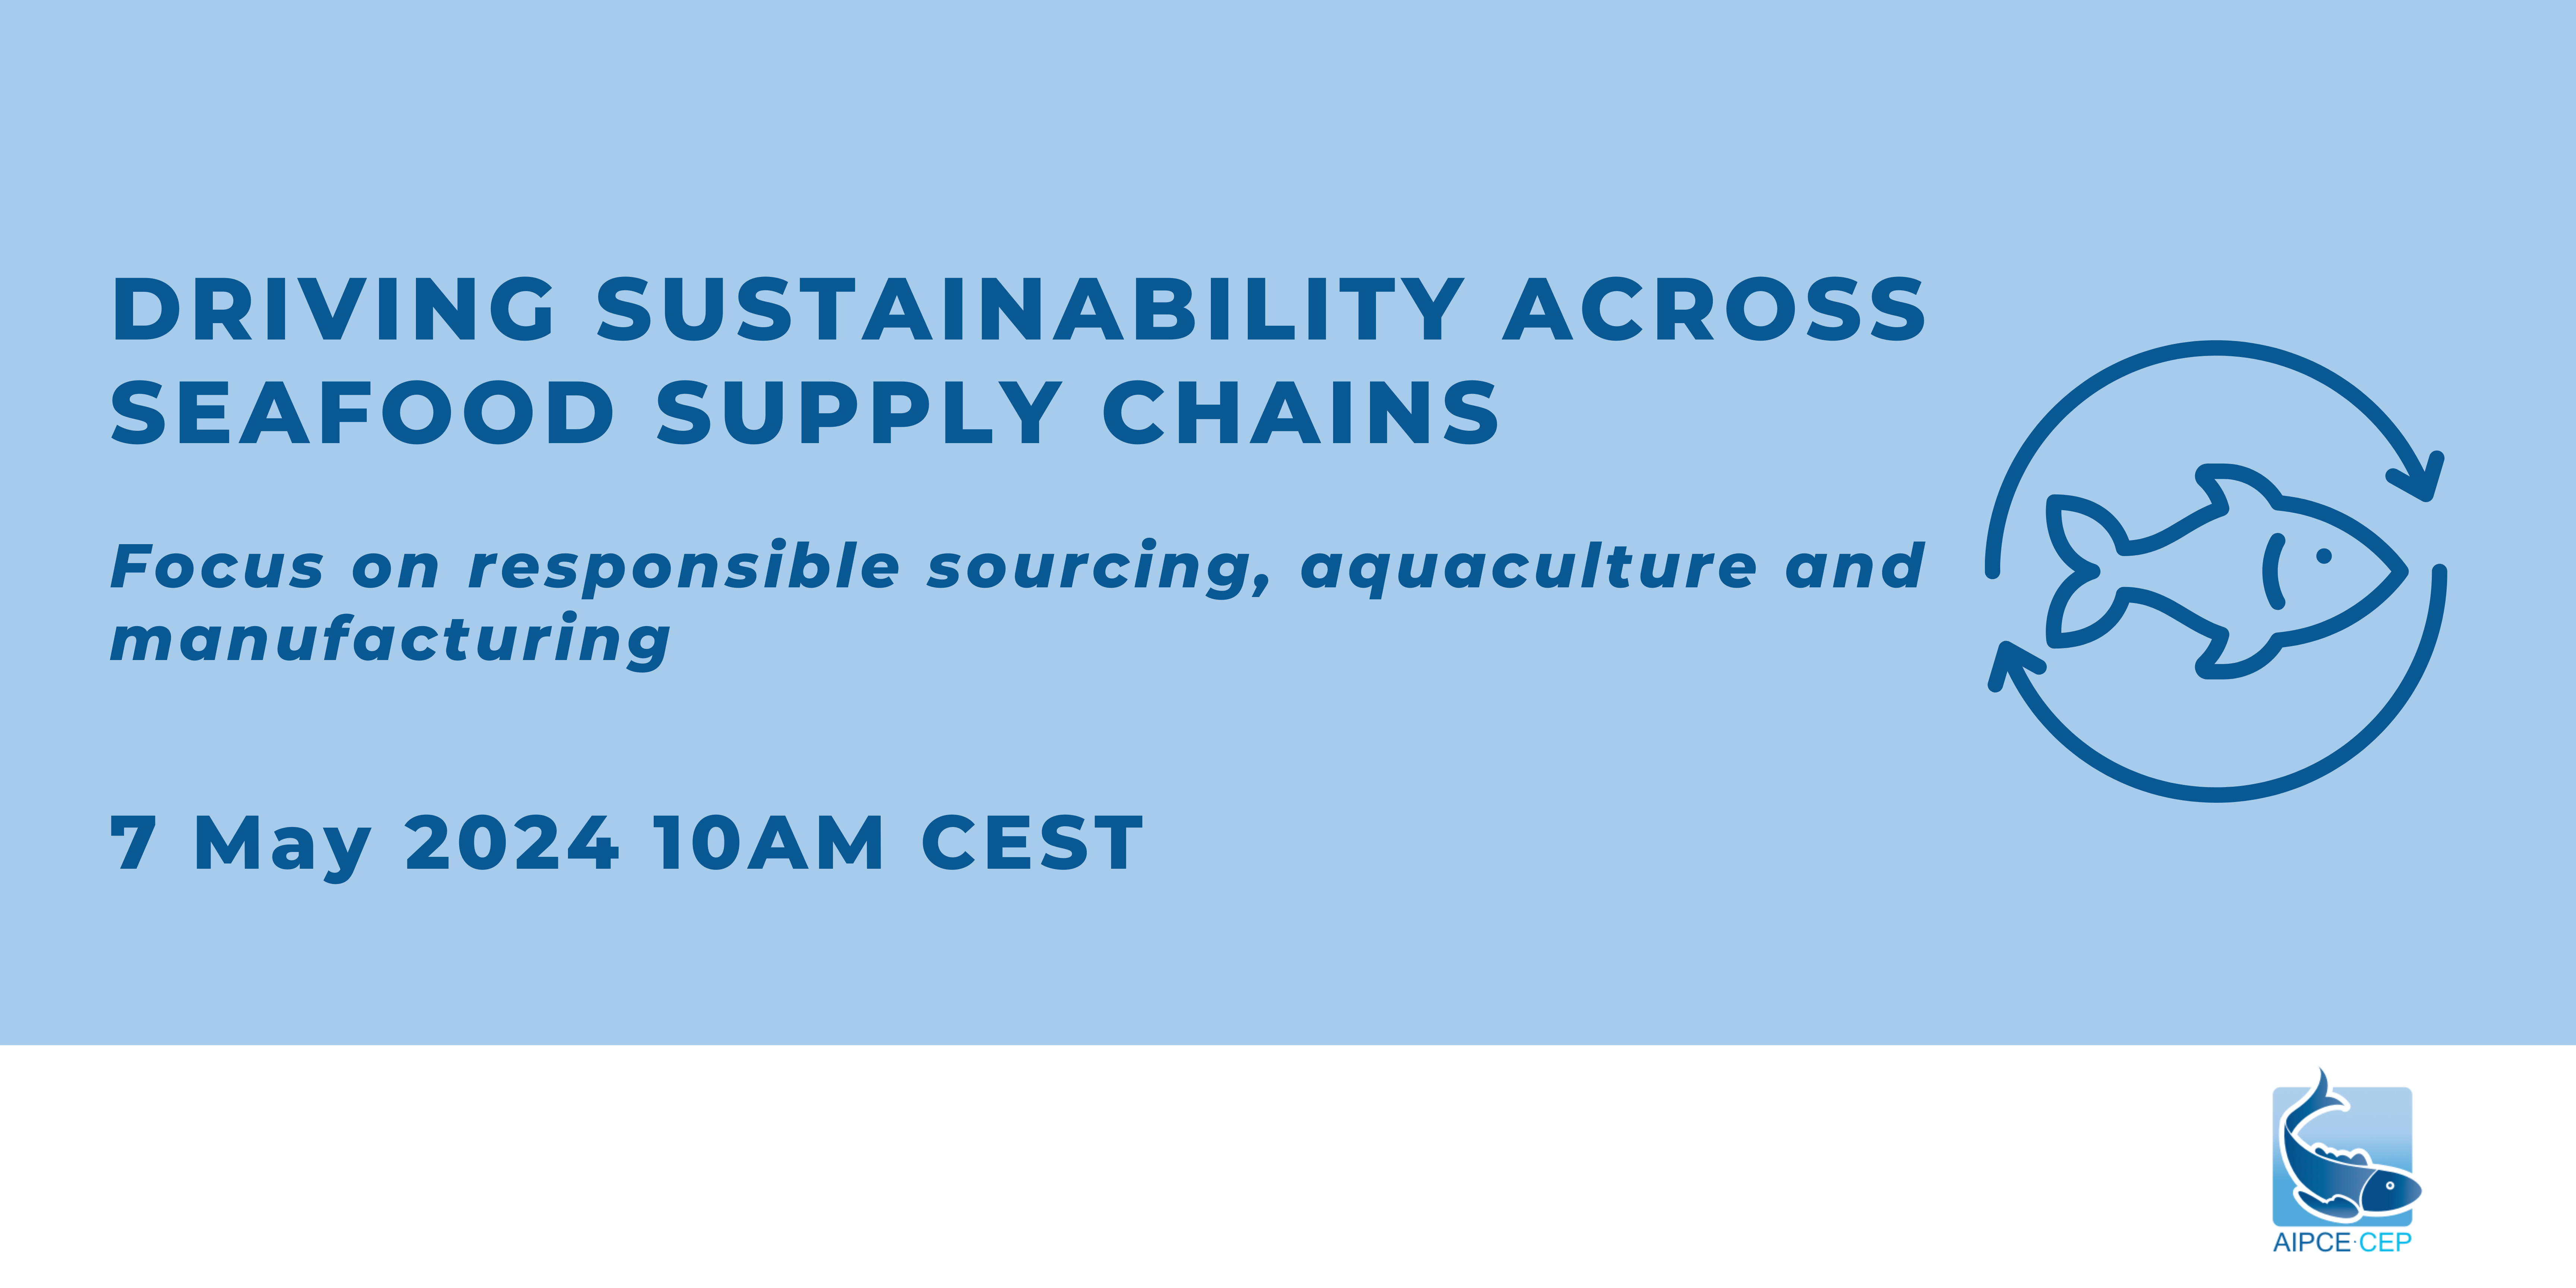 Driving sustainability across seafood supply chains